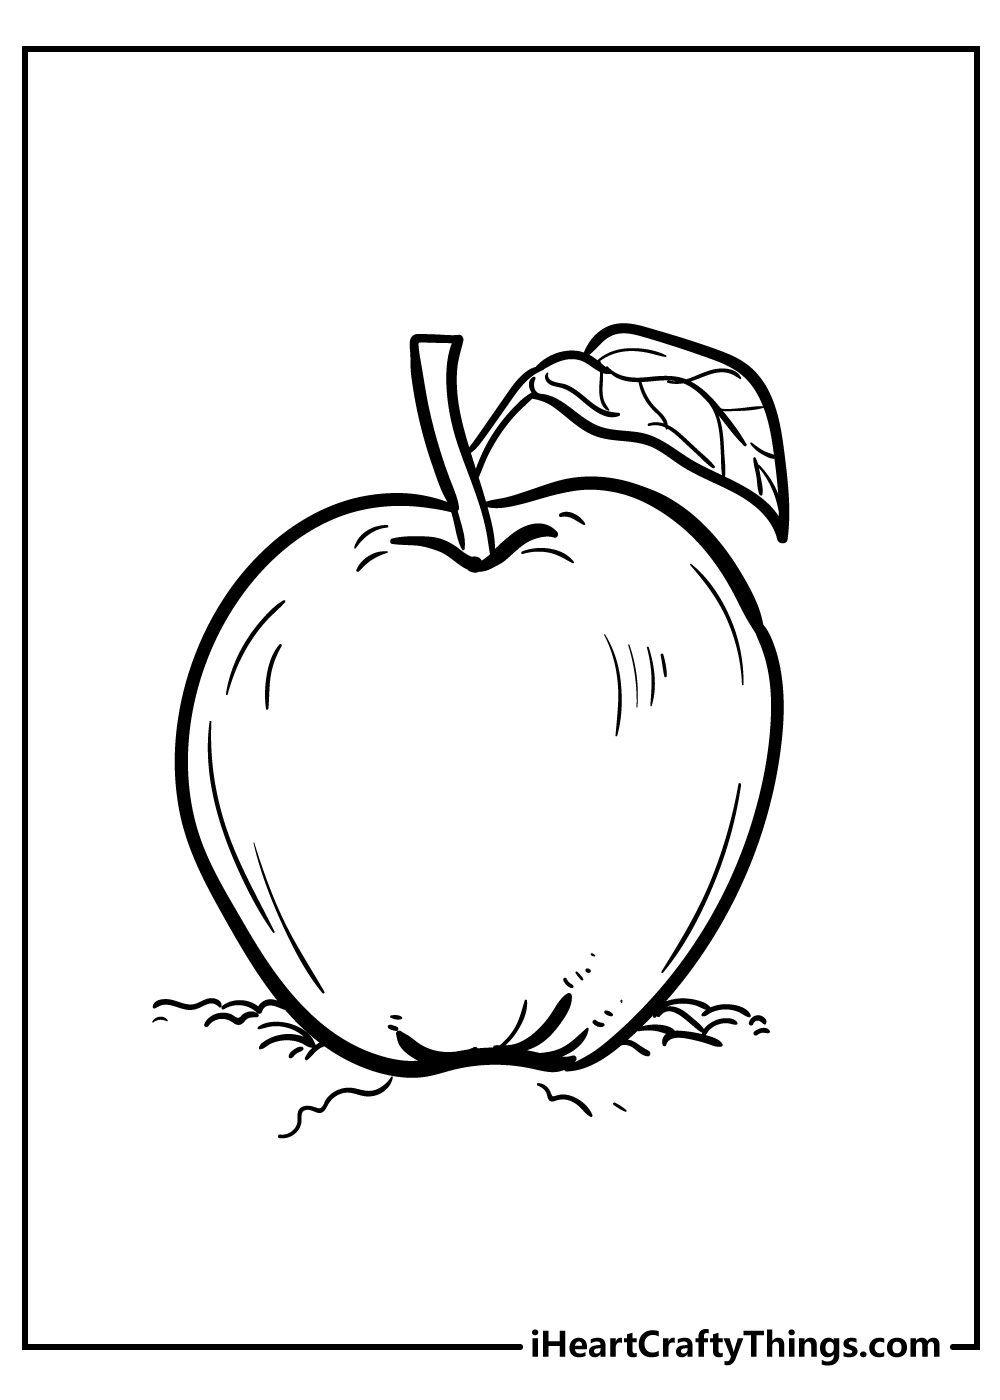 Apple coloring pages free printables